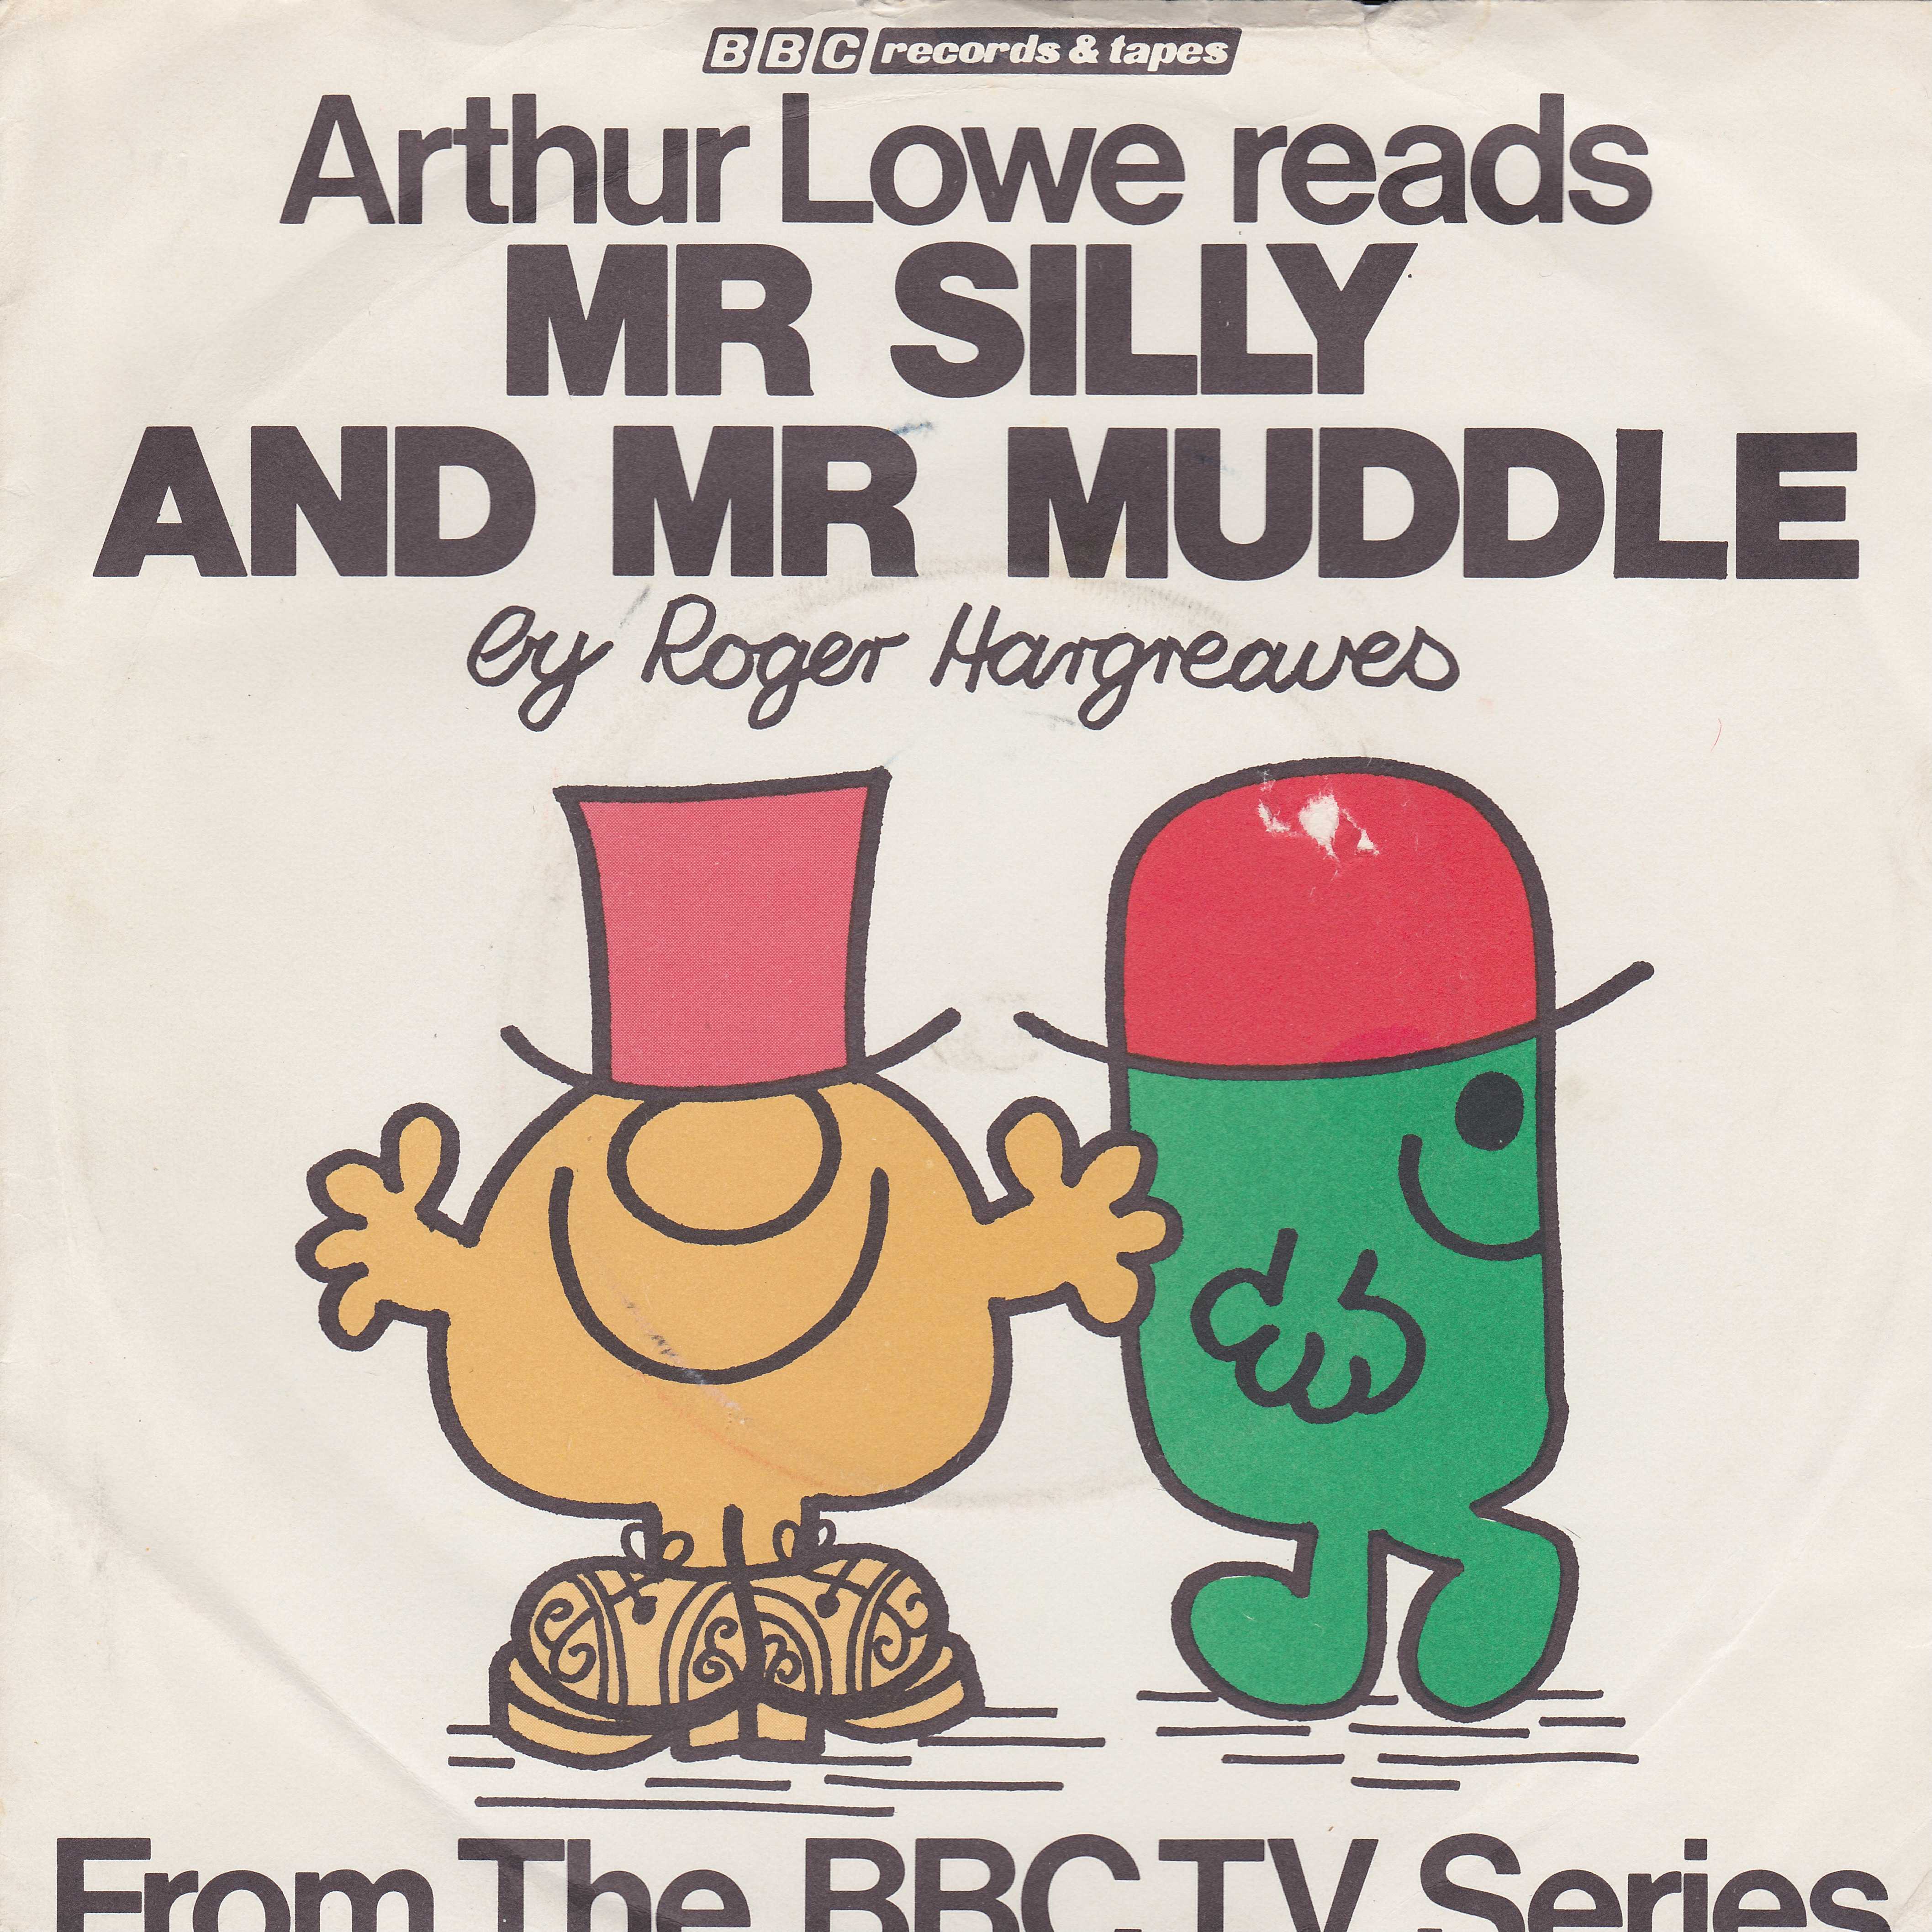 Picture of RESL 41 Mr Men - Mr Silly by artist Roger Hargreaves from the BBC singles - Records and Tapes library